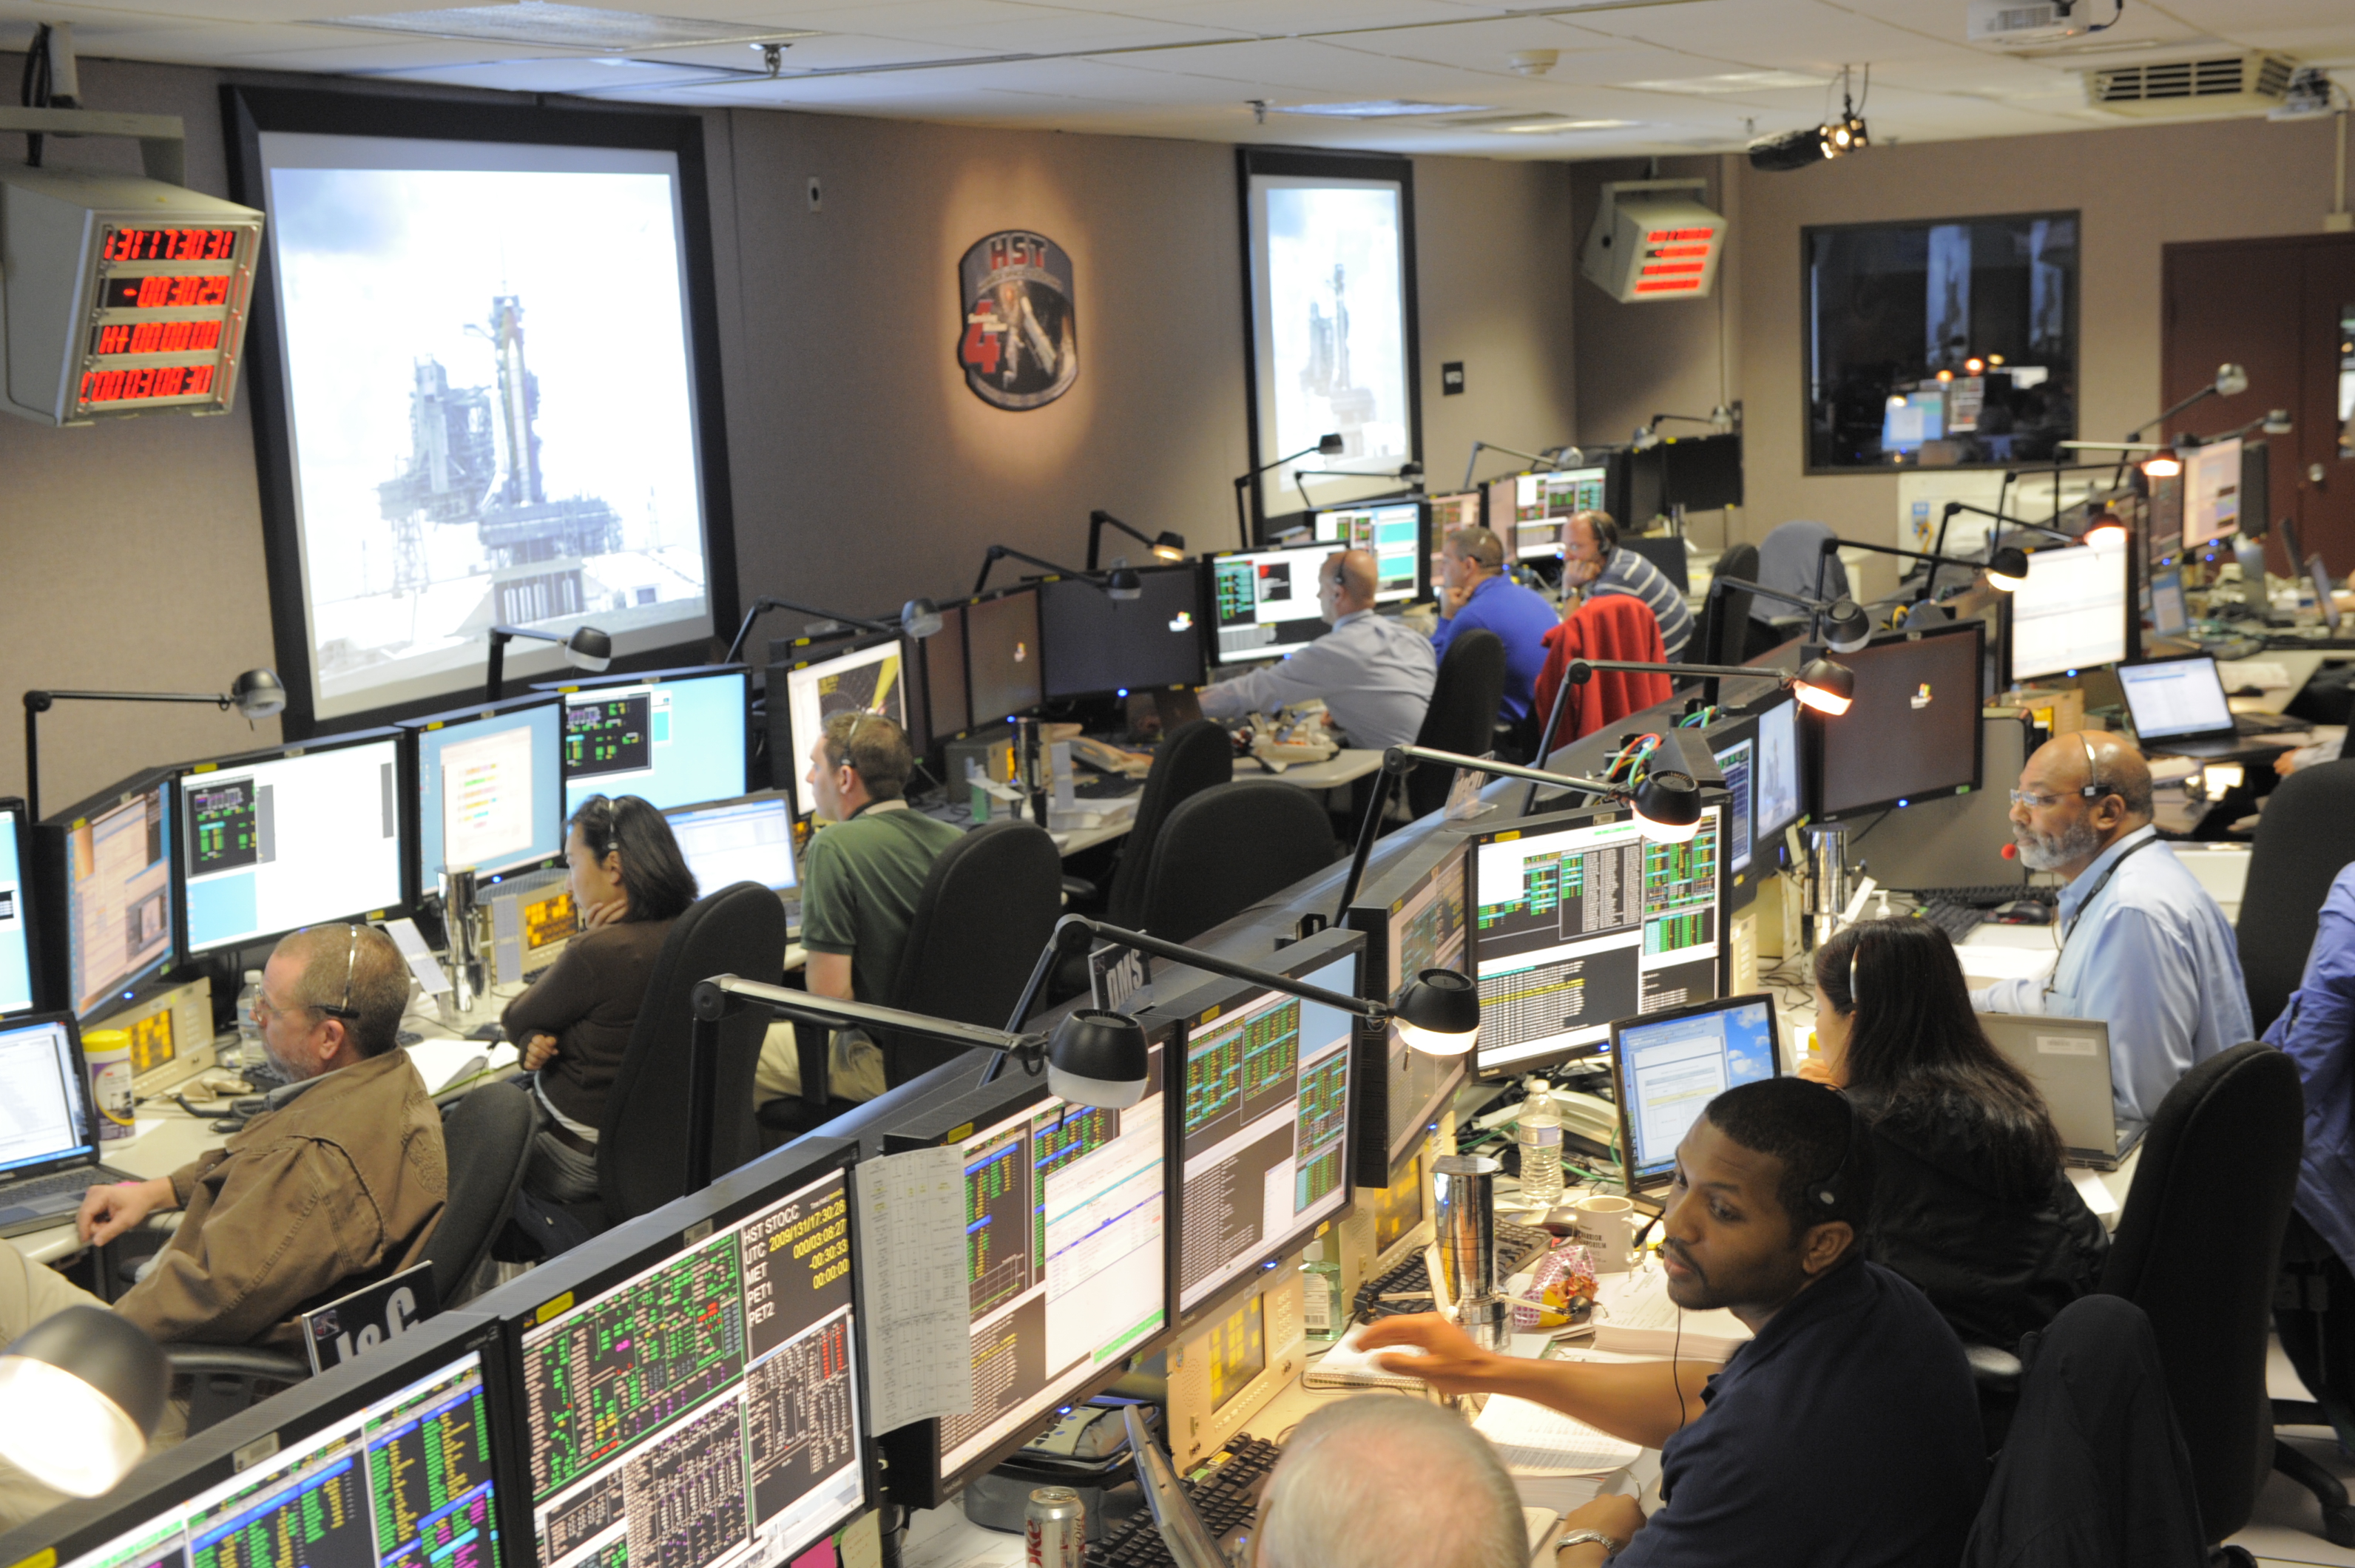 Hubble's Operations Support Room in the control center is fully staffed at consoles while the shuttle on the launch pad is on the big screens.